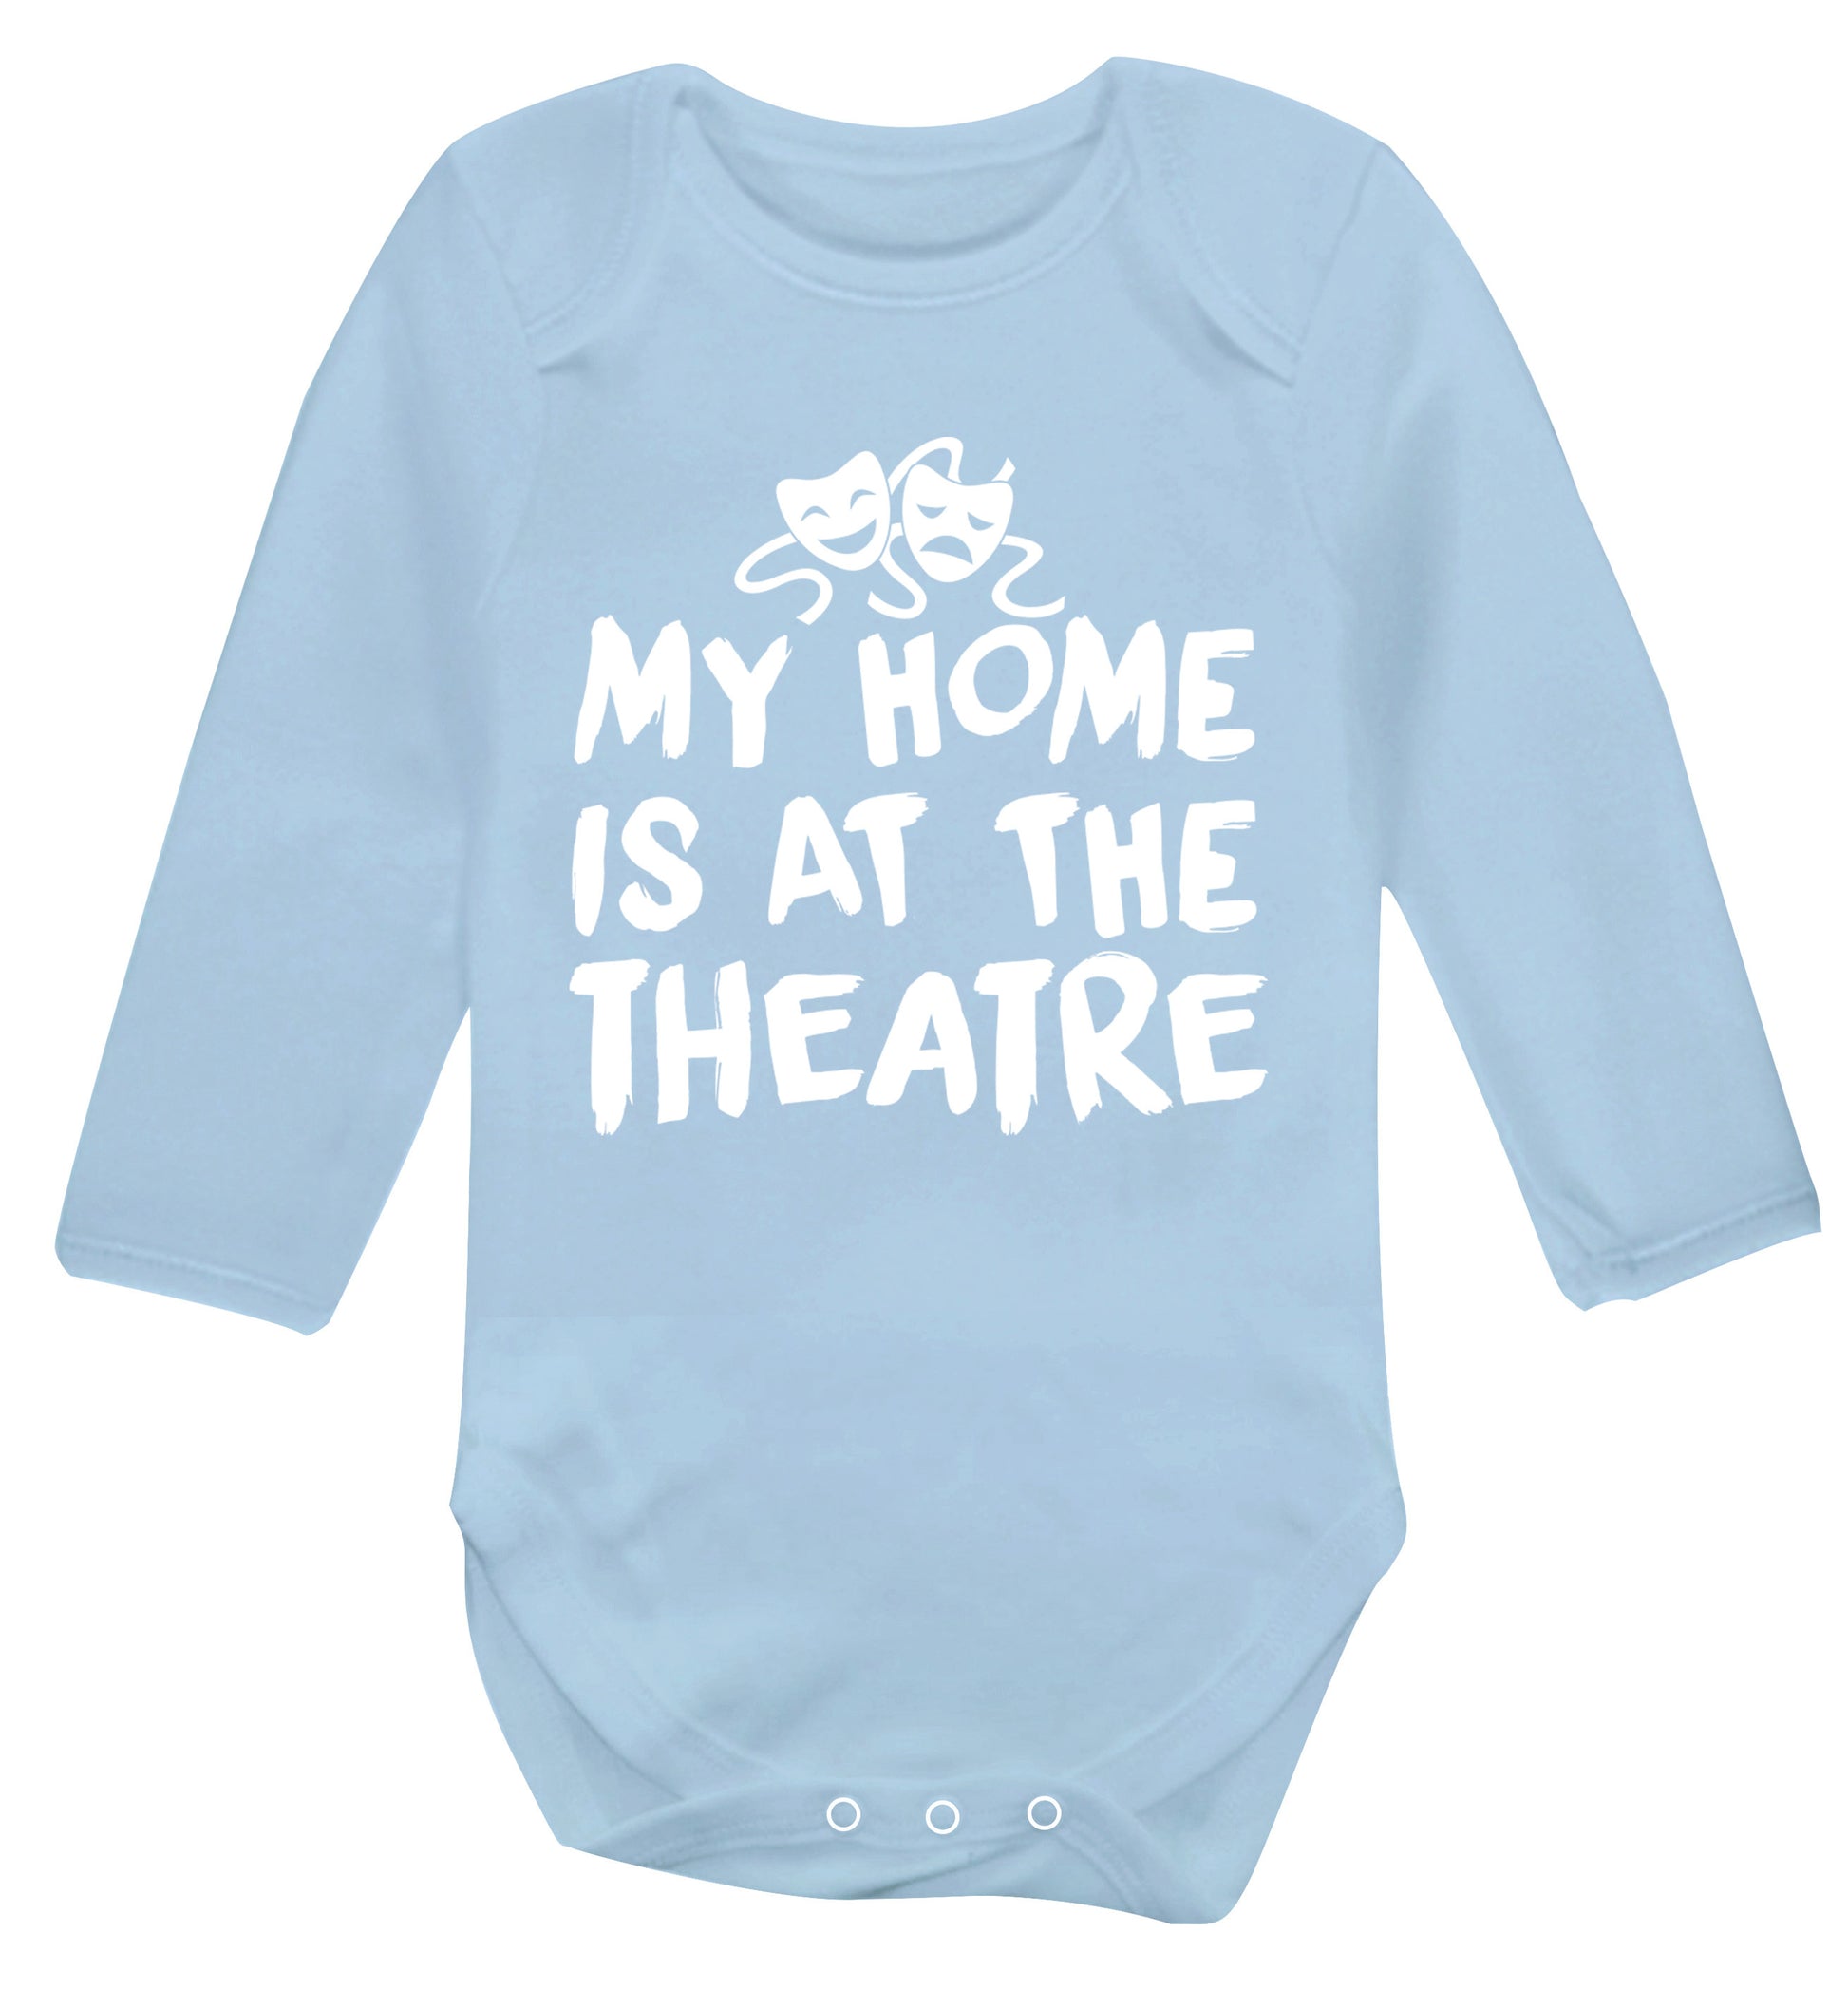 My home is at the theatre Baby Vest long sleeved pale blue 6-12 months